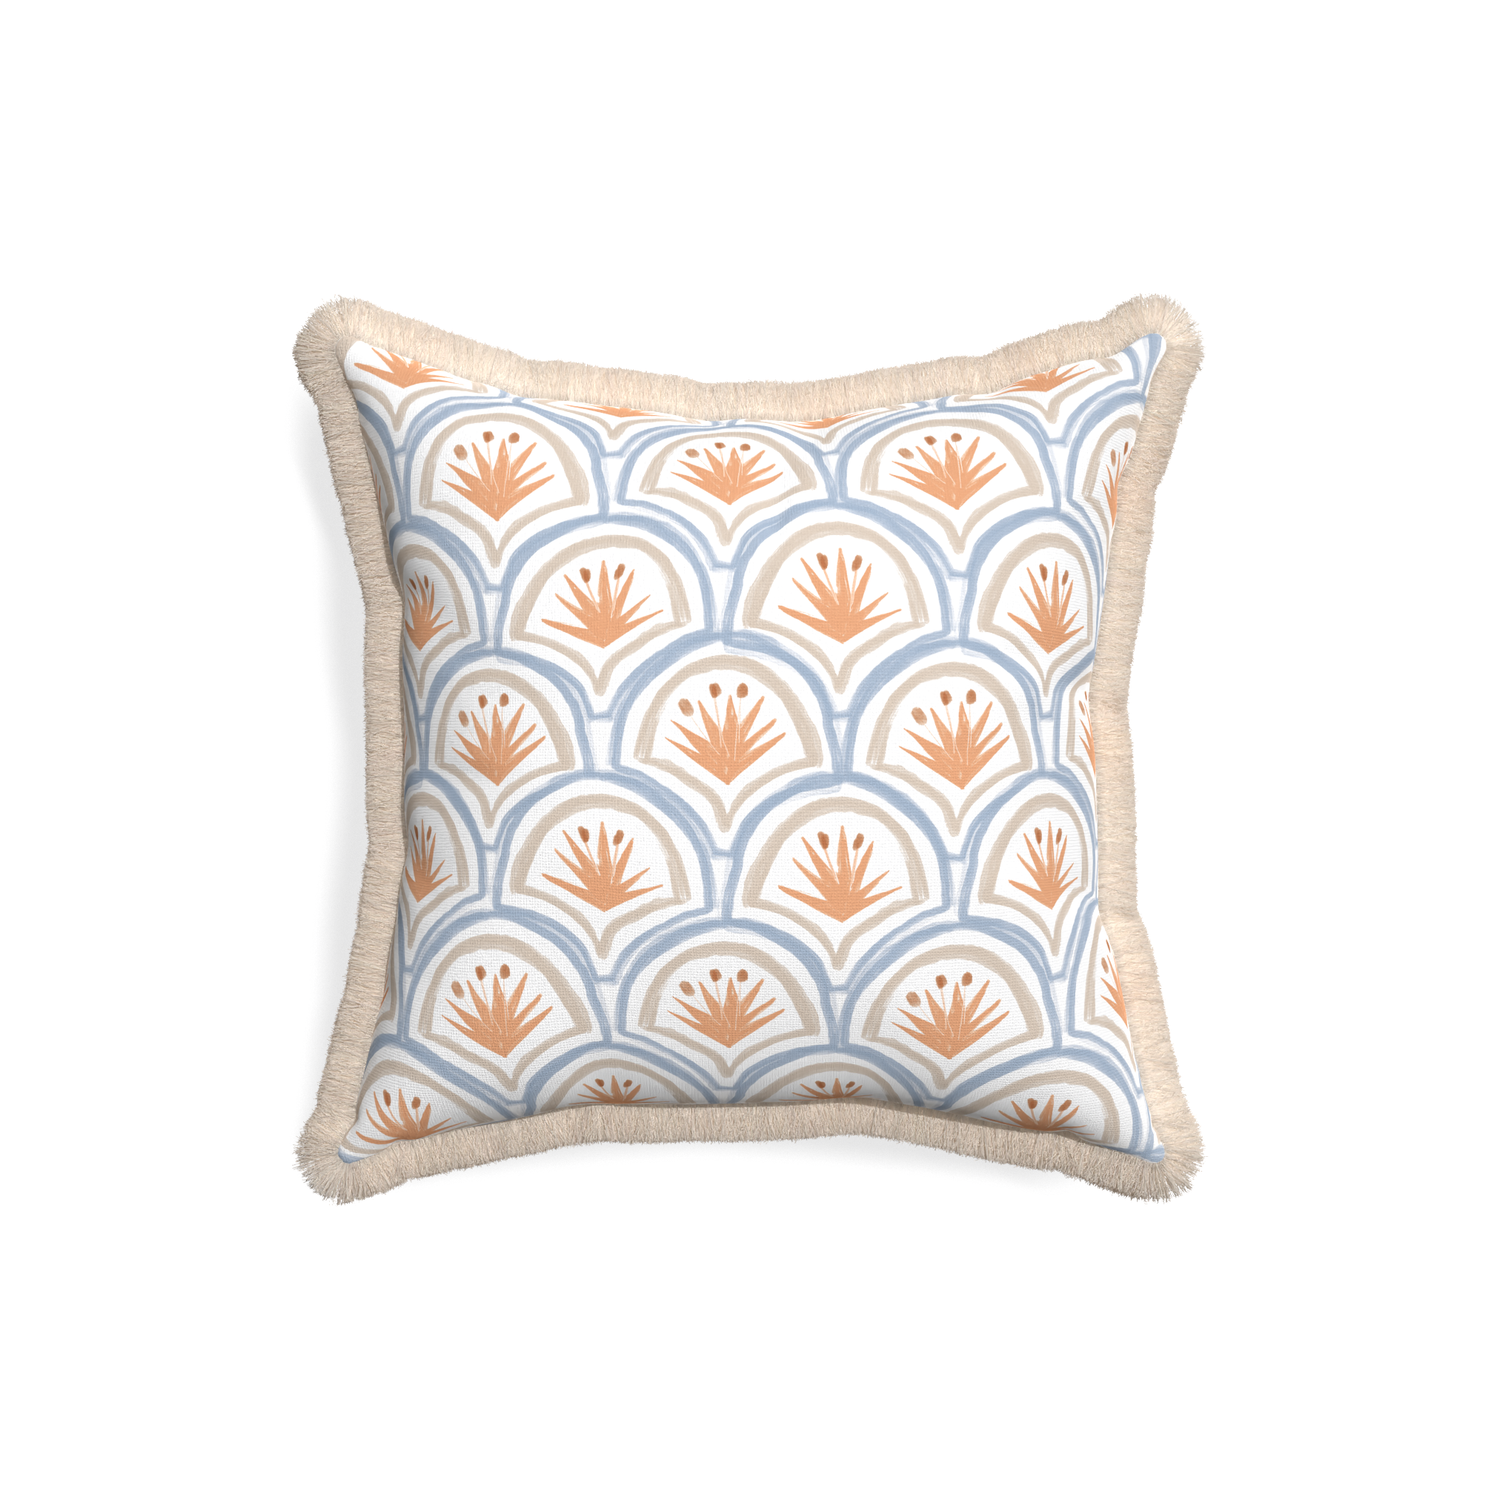 18-square thatcher apricot custom pillow with cream fringe on white background